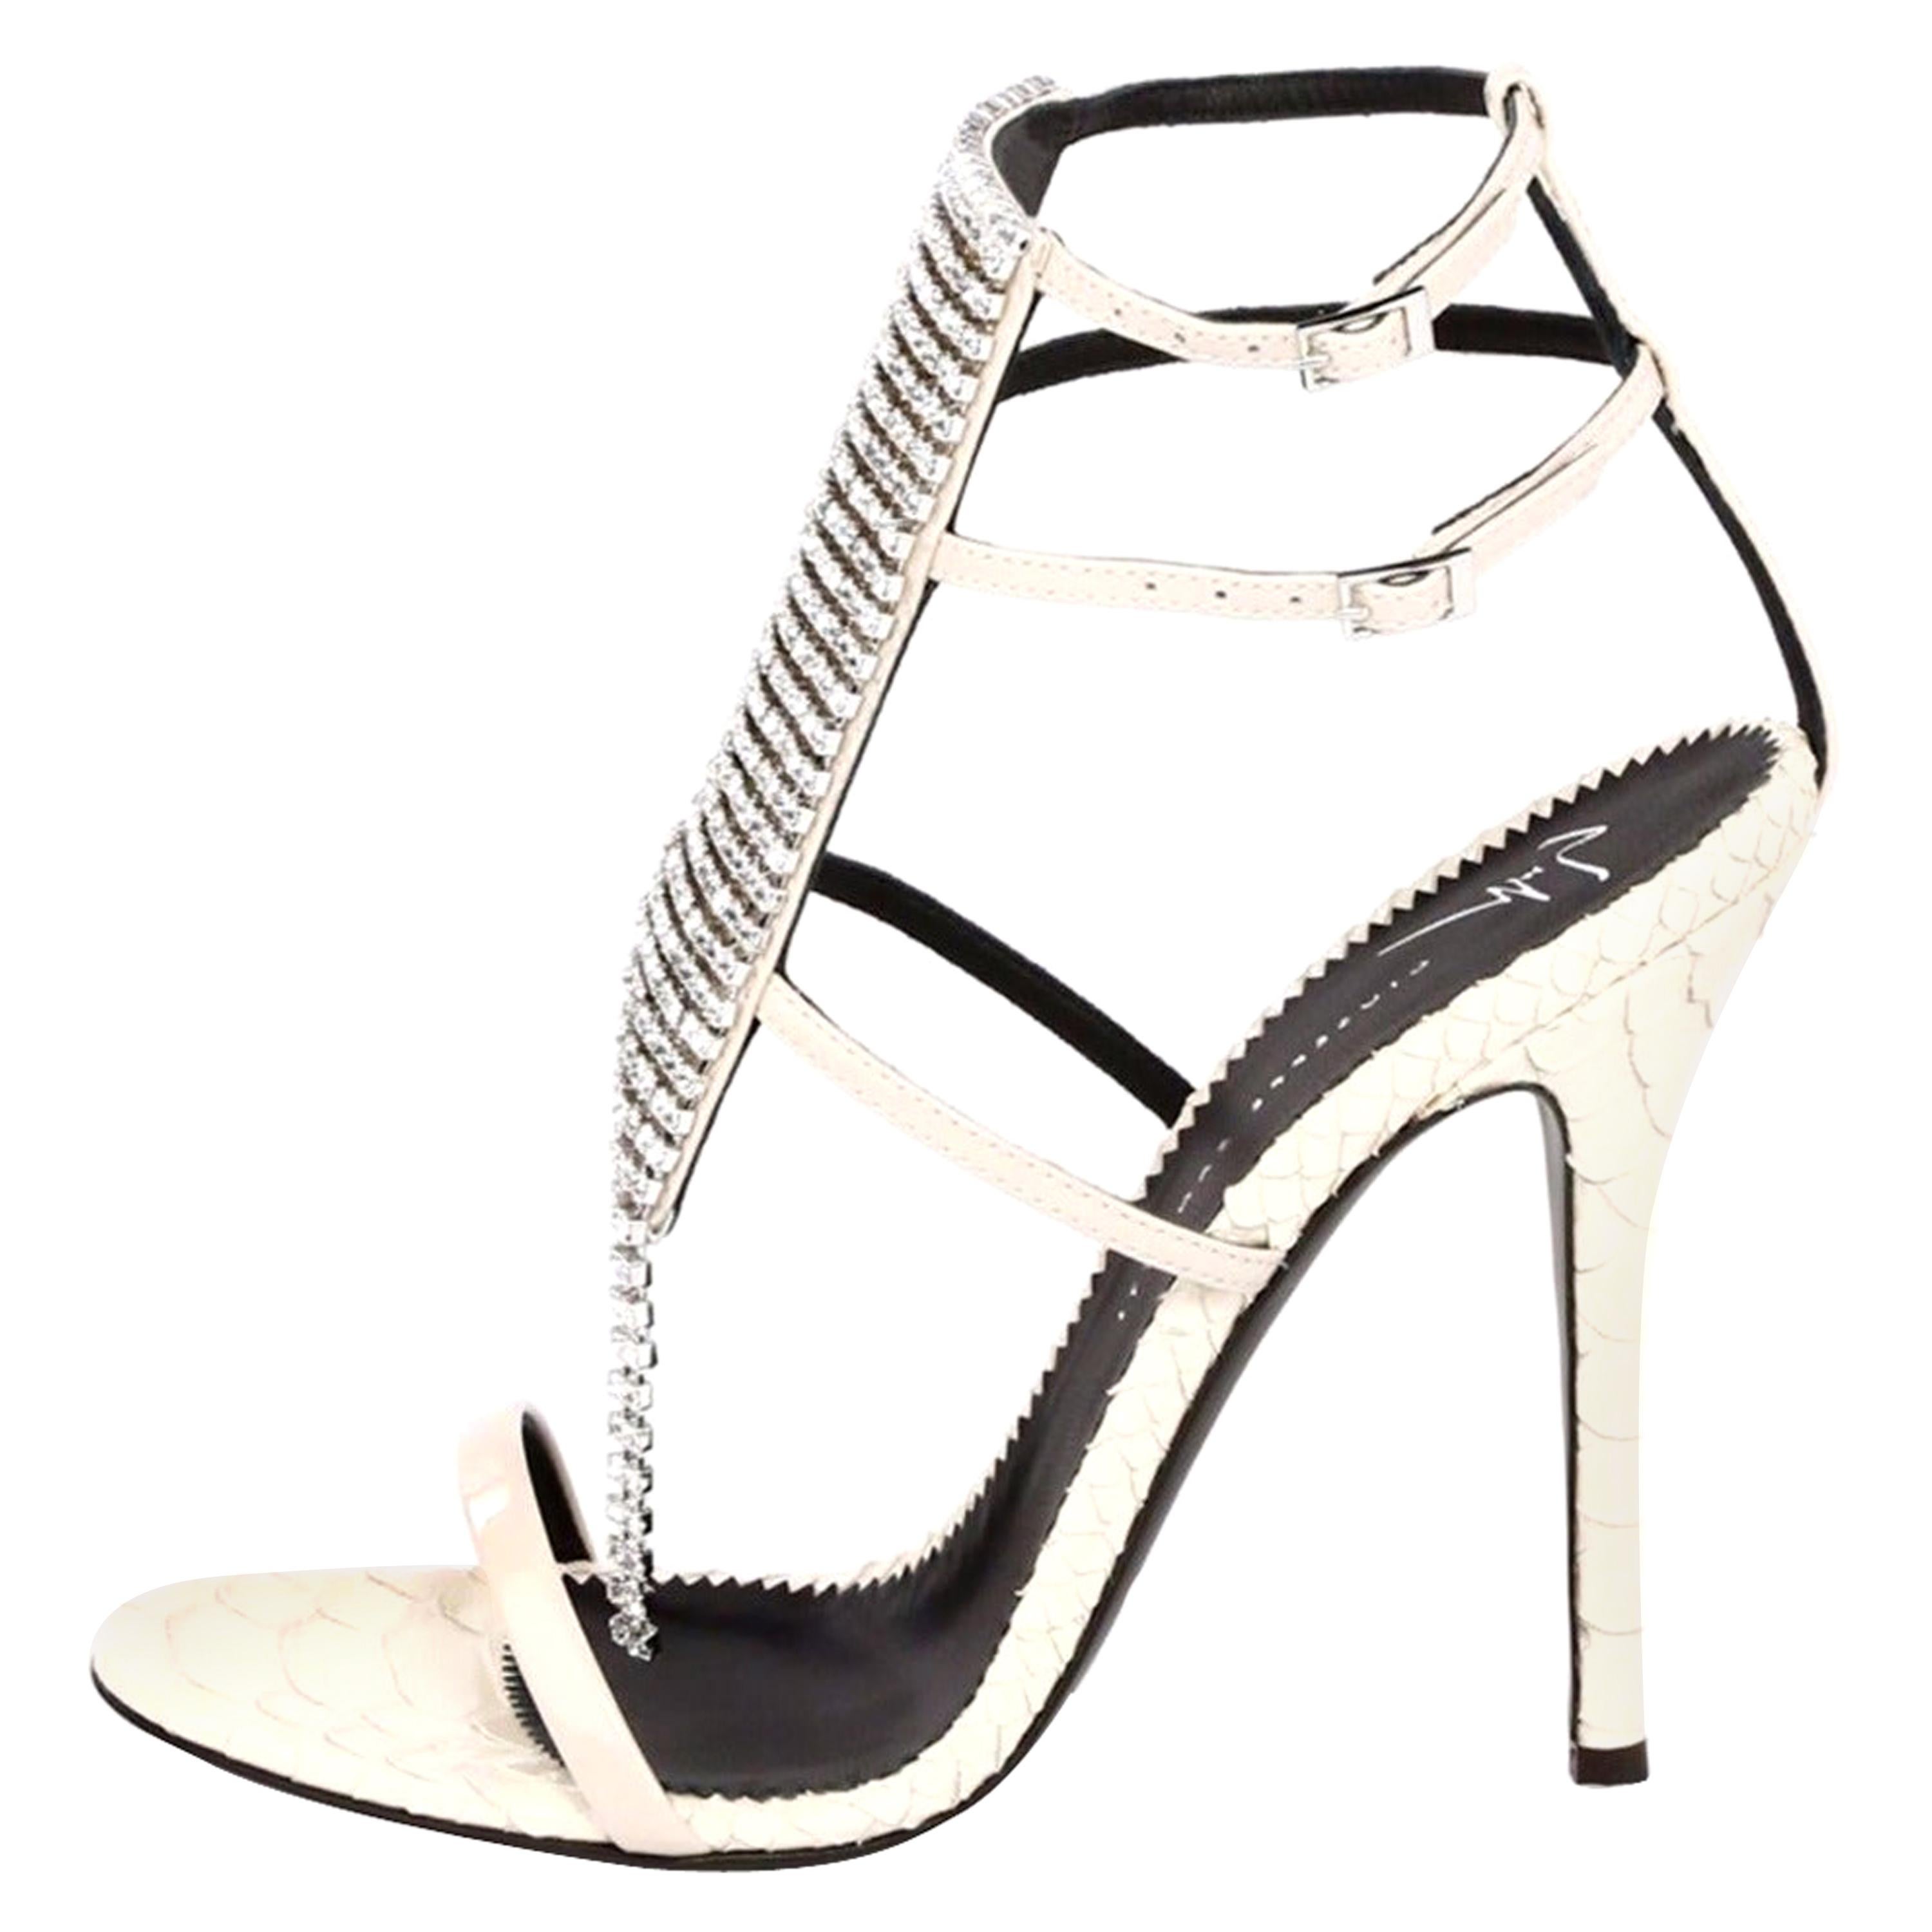 Giuseppe Zanotti NEW Ivory Leather Crystal Strappy Evening Sandals Heels in Box